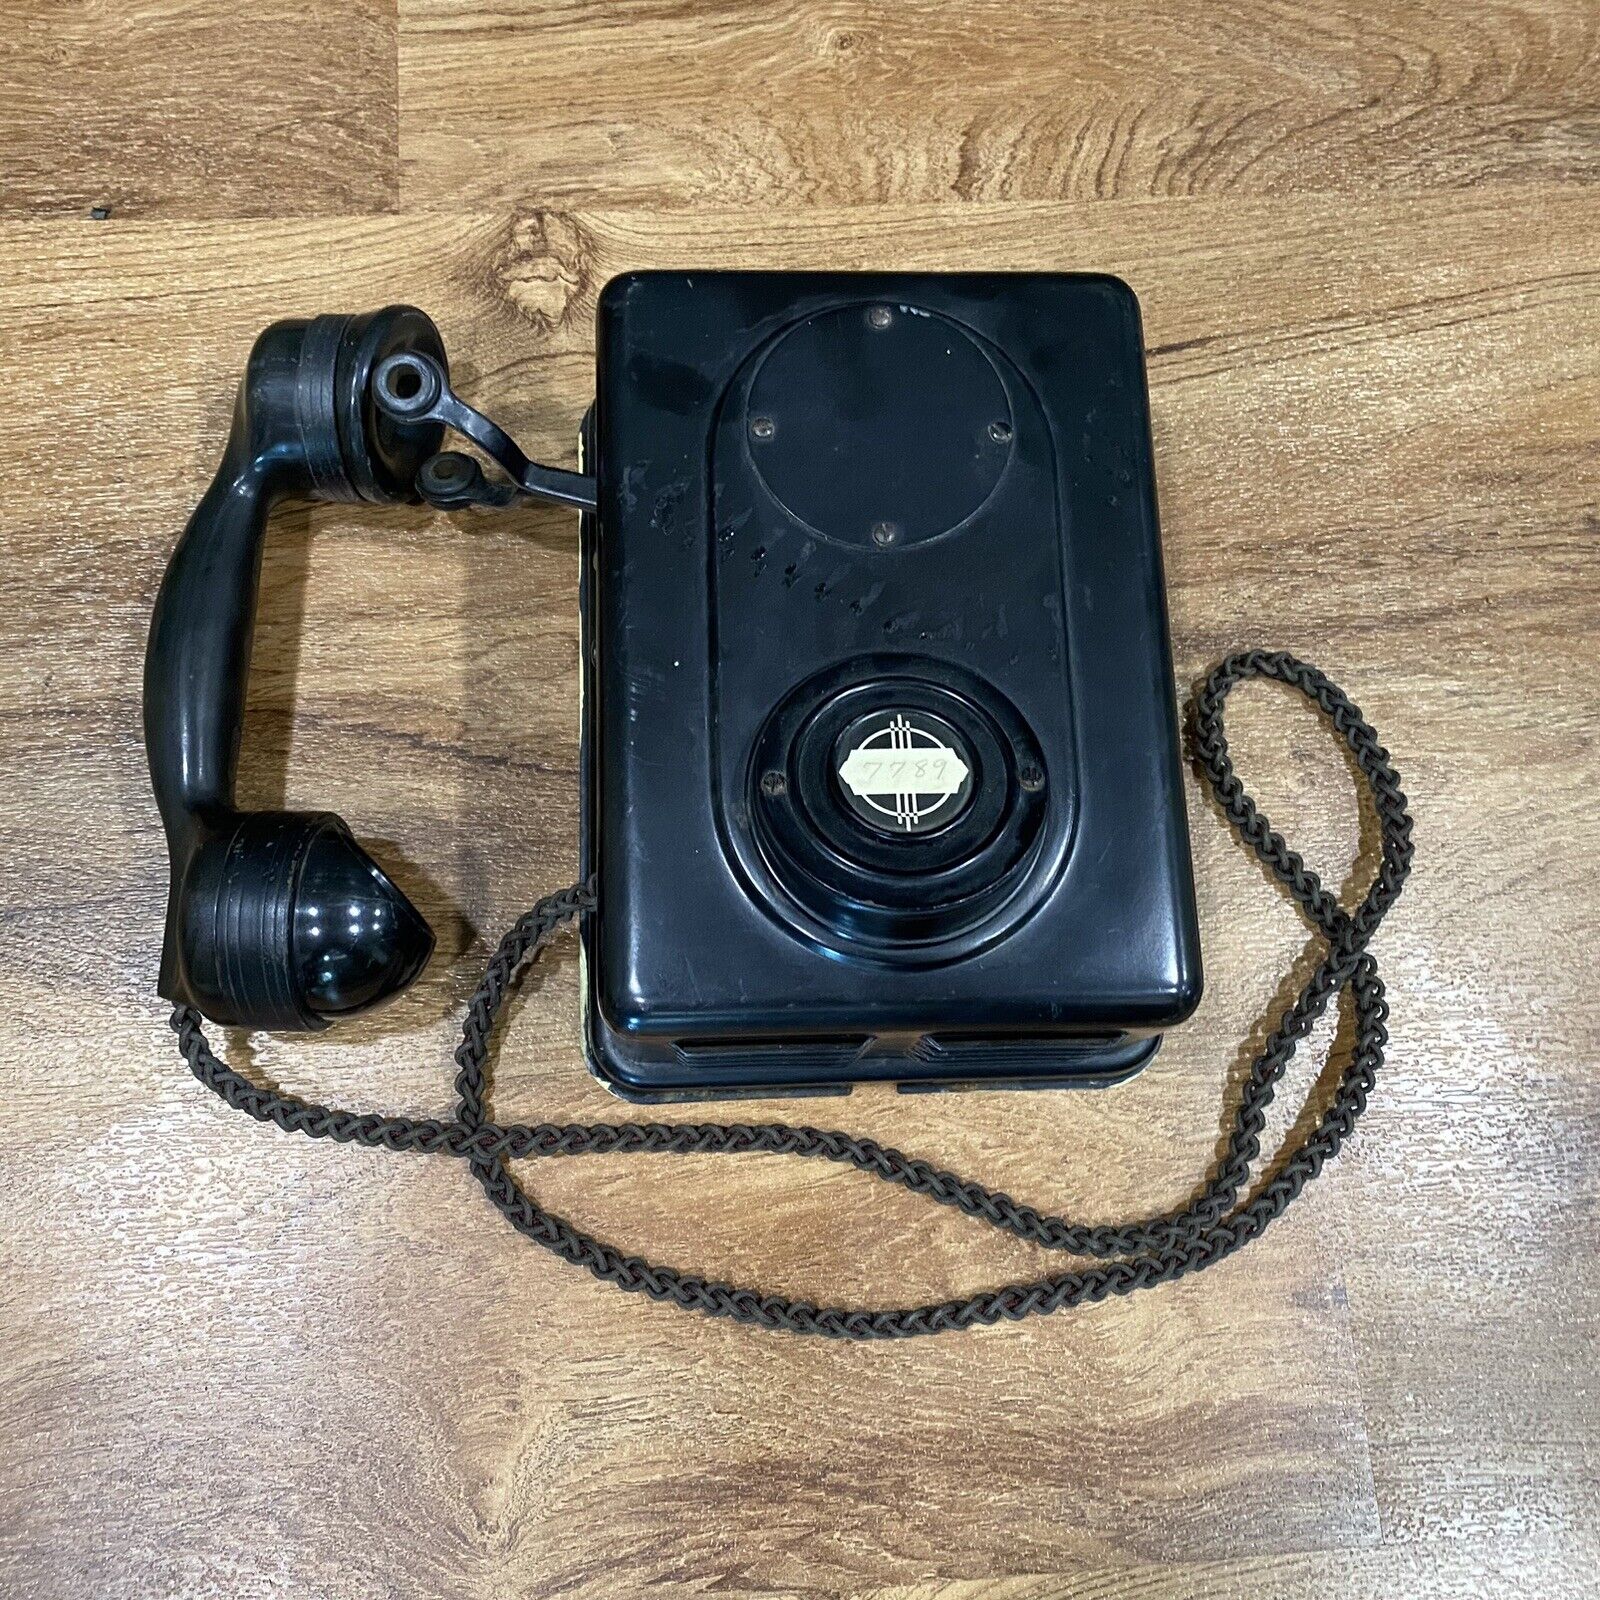 Vintage AE CO Automatic Electric Black Phone 21 Wall Mount Telephone No Dial